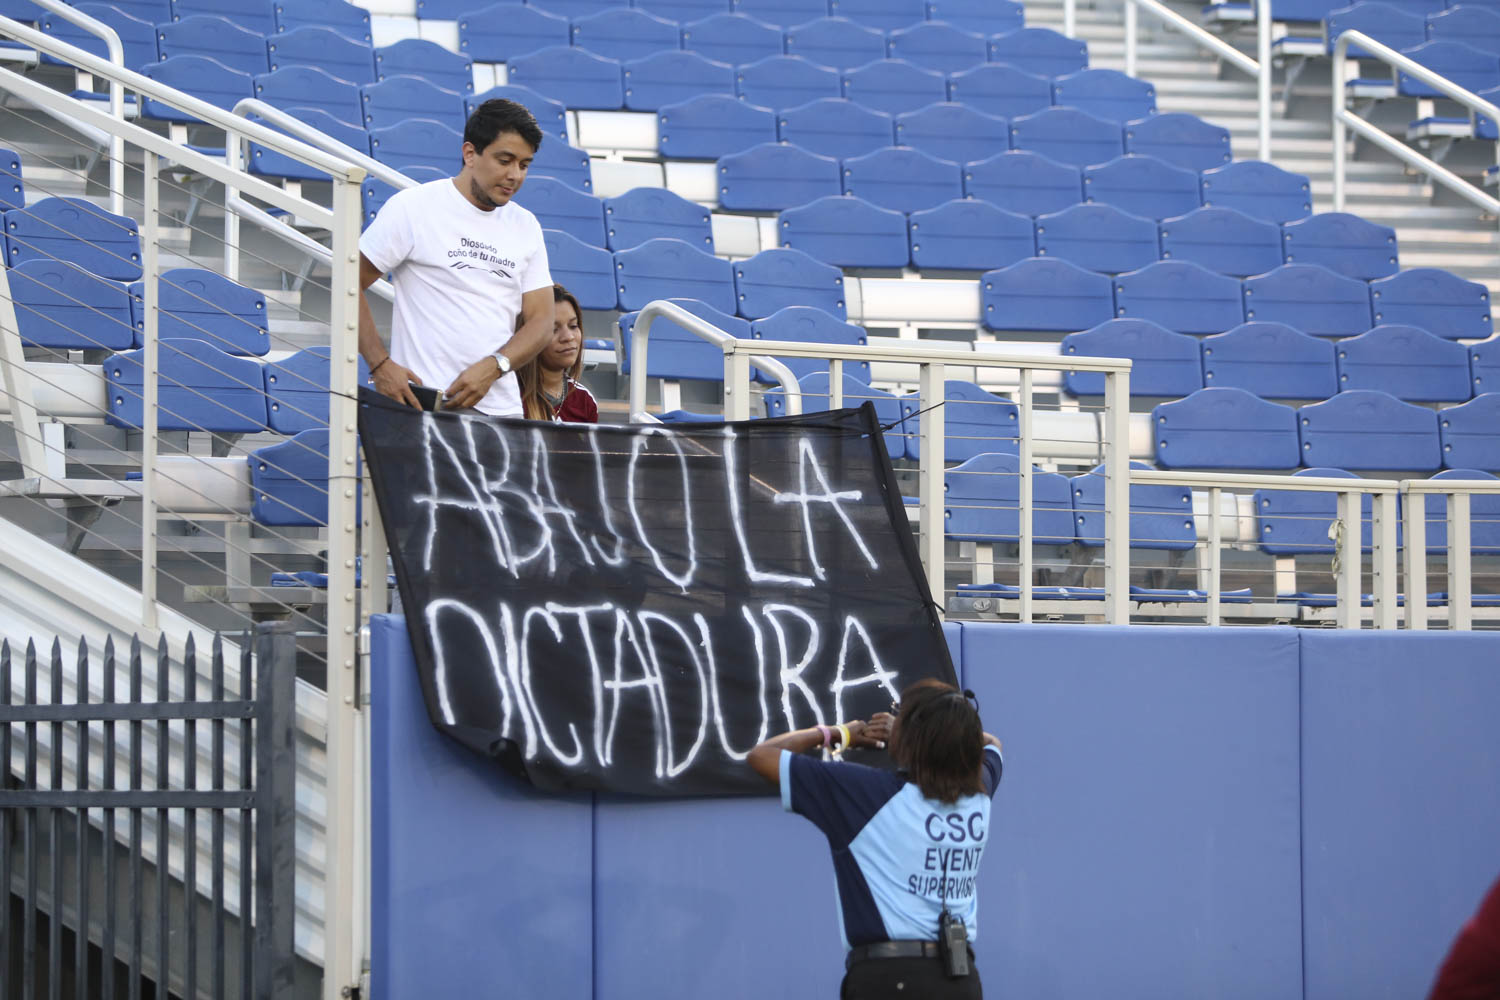 A sign that reads Down with dictatorship in Spanish is removed by an event supervisor during the match between Venezuela and Ecuador. Photo by Alexander Rodriguez